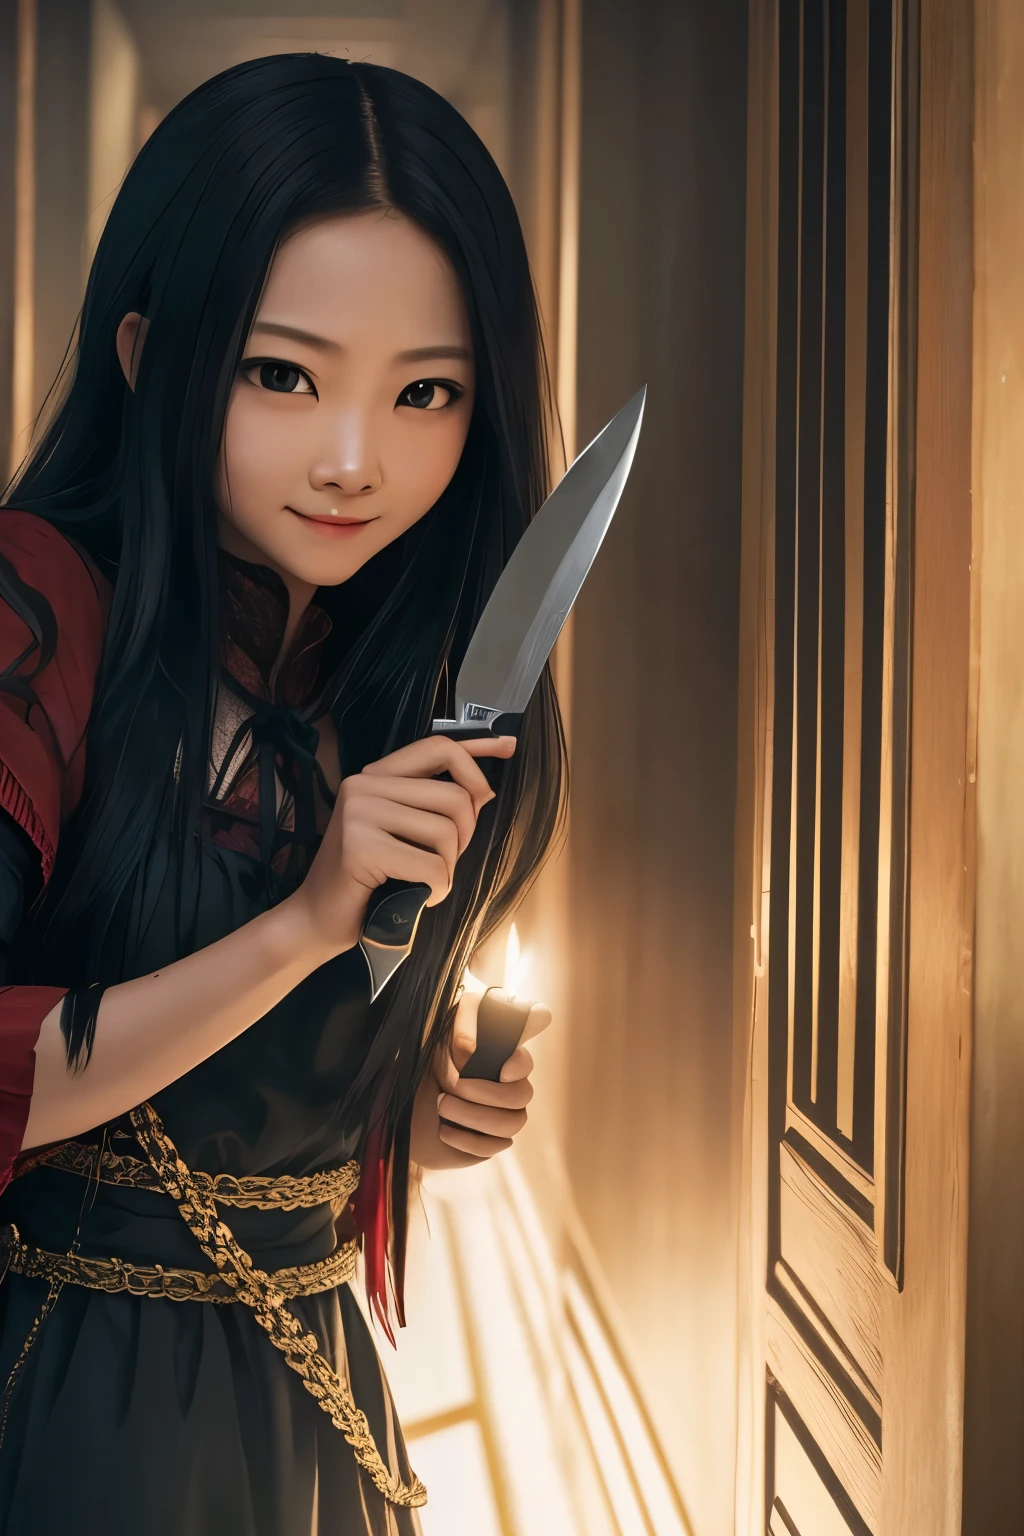 Scary girl、He looks at us with a knife in his hand and smiles、Room corridor、Ultra-high image quality、high resolution、8K、16K、Live action、bloodthirsty、Believe